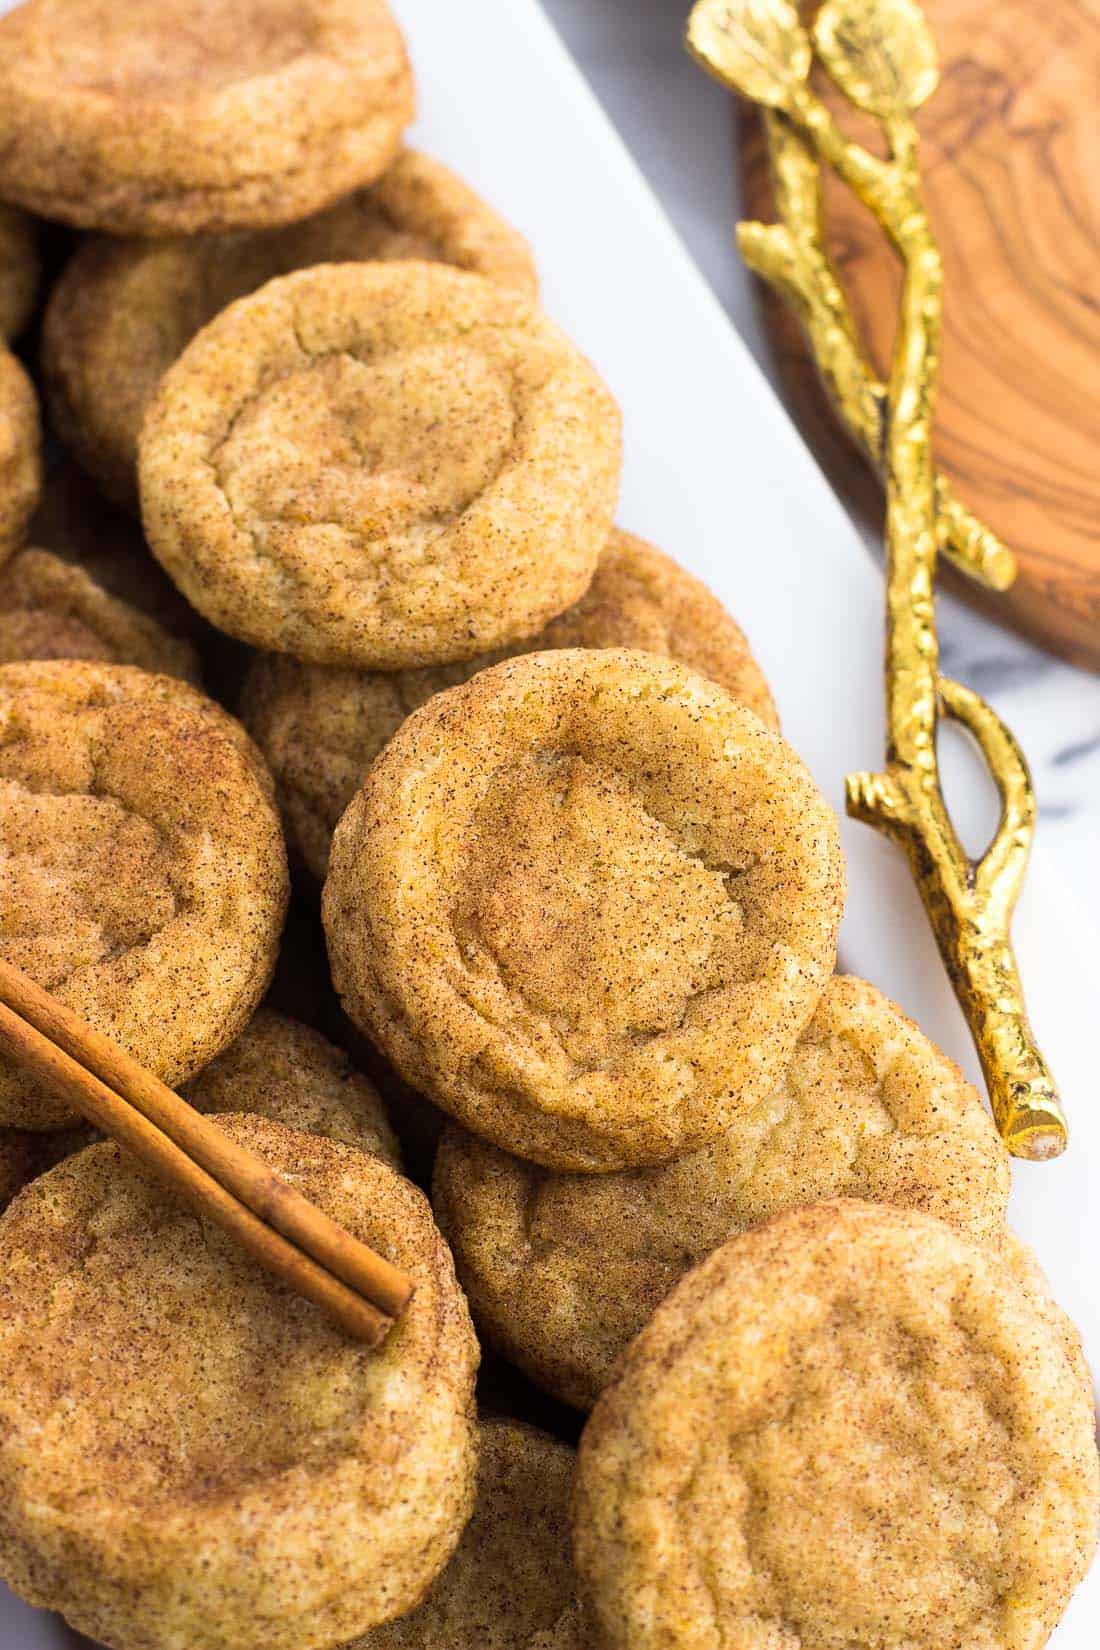 A tray of snickerdoodles with a cinnamon stick next to it